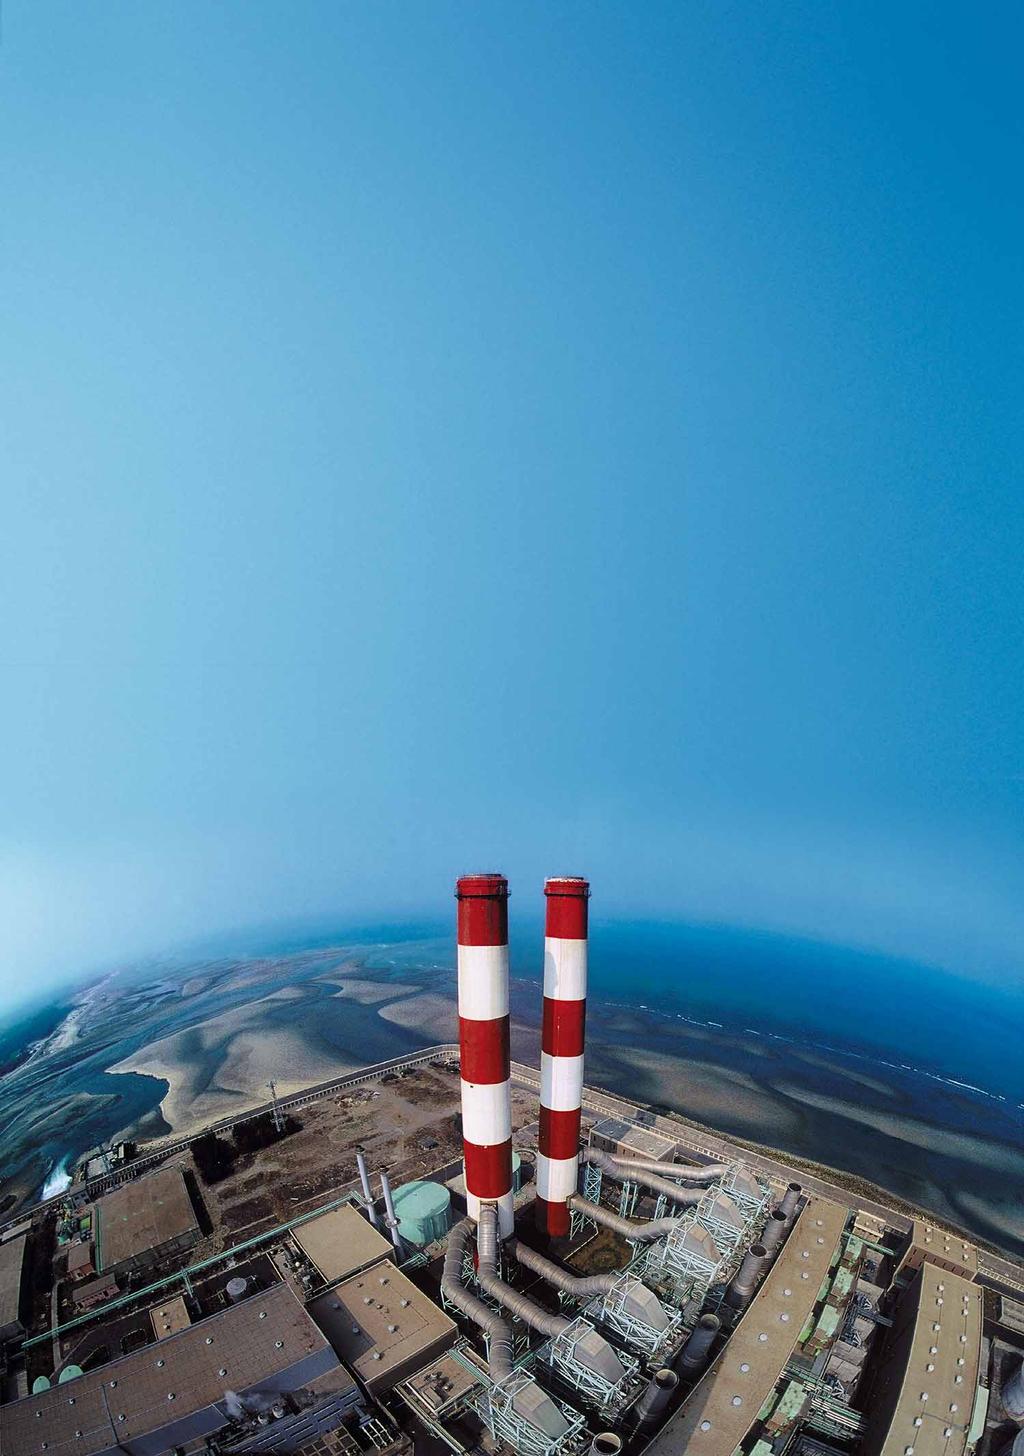 Efficiency up, emissions down Achieving higher power plant performance with advanced process control Pekka Immonen, Ted Matsko, Marc Antoine Coal-fired power plants have come a long way in the last